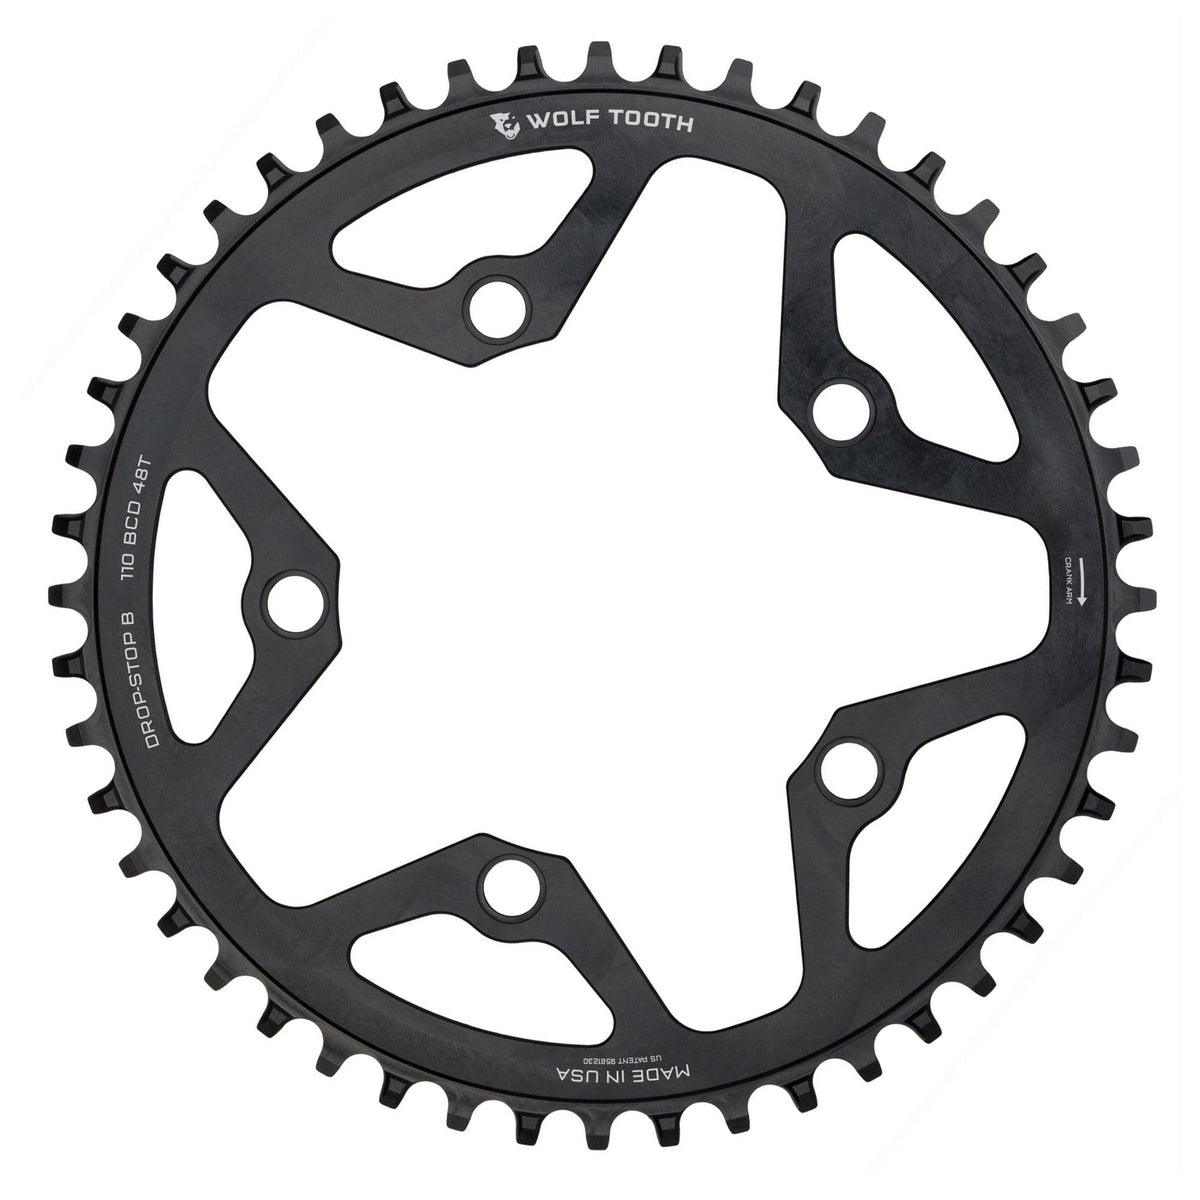 www.wolftoothcomponents.com